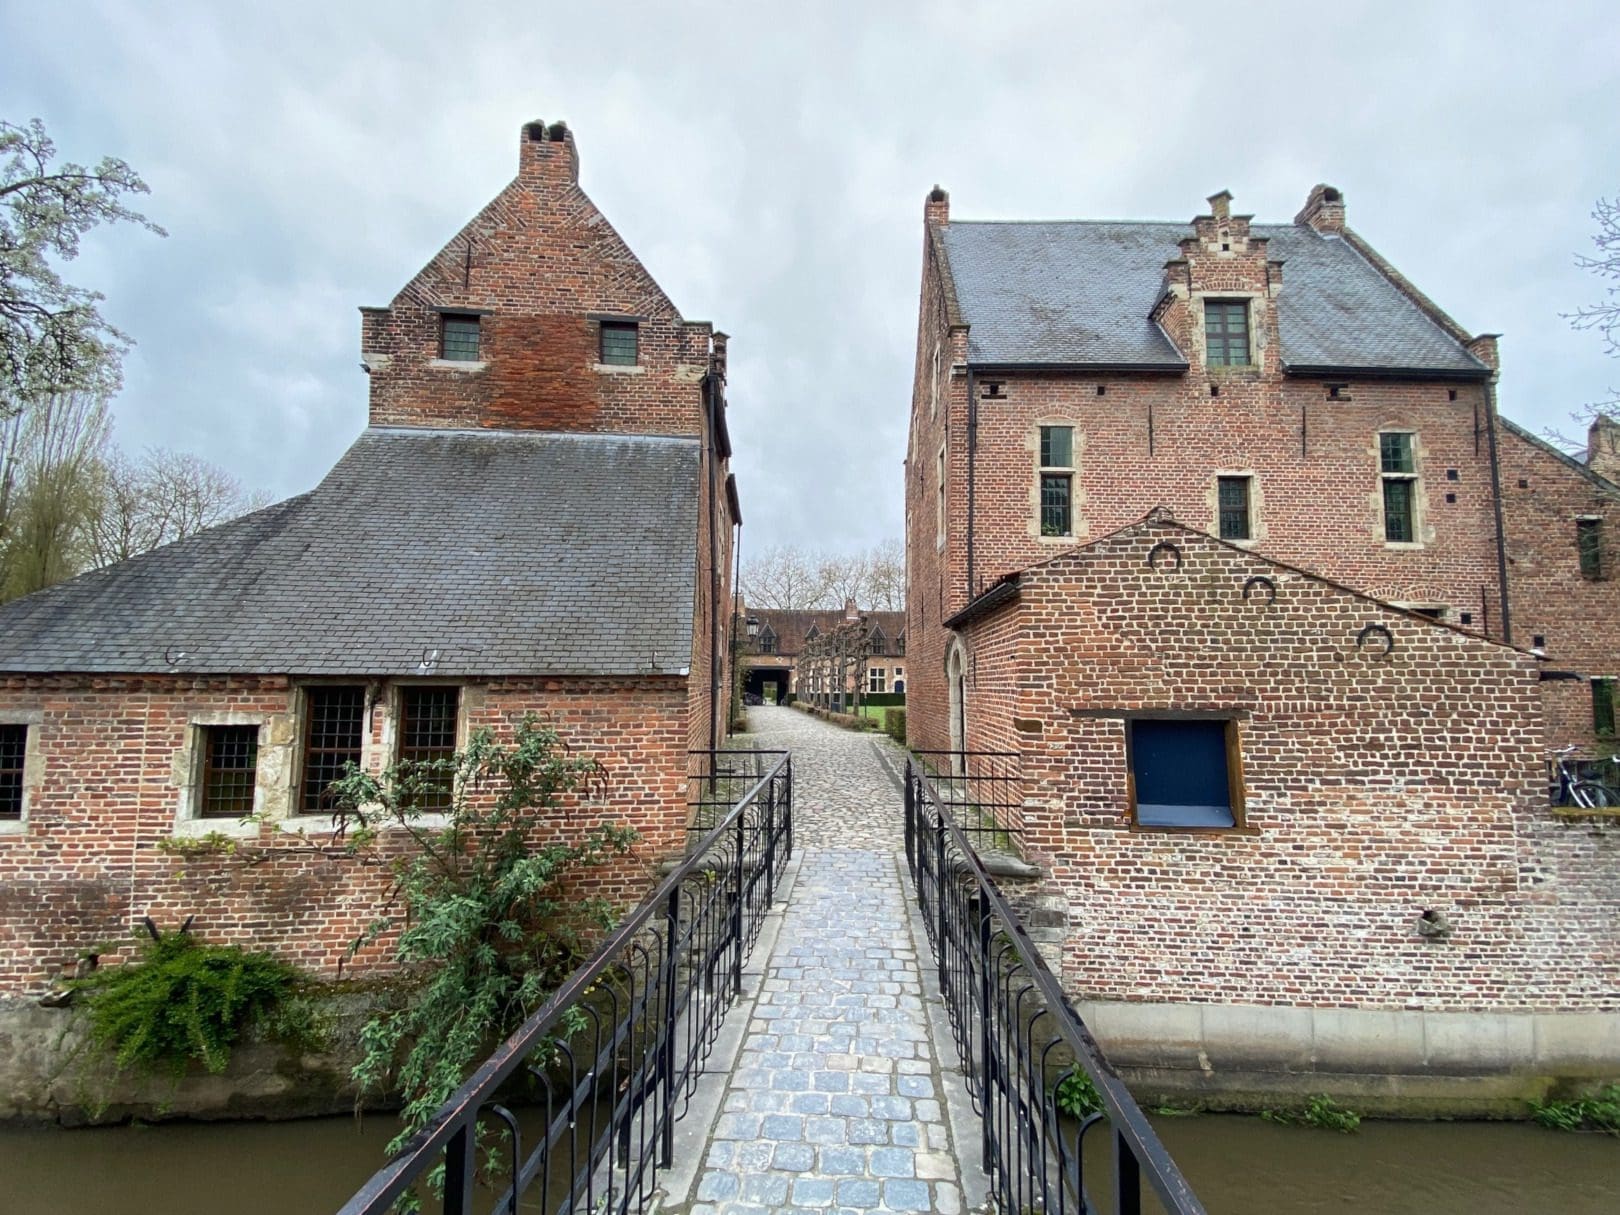 Grand Beguinage over the River Dyle